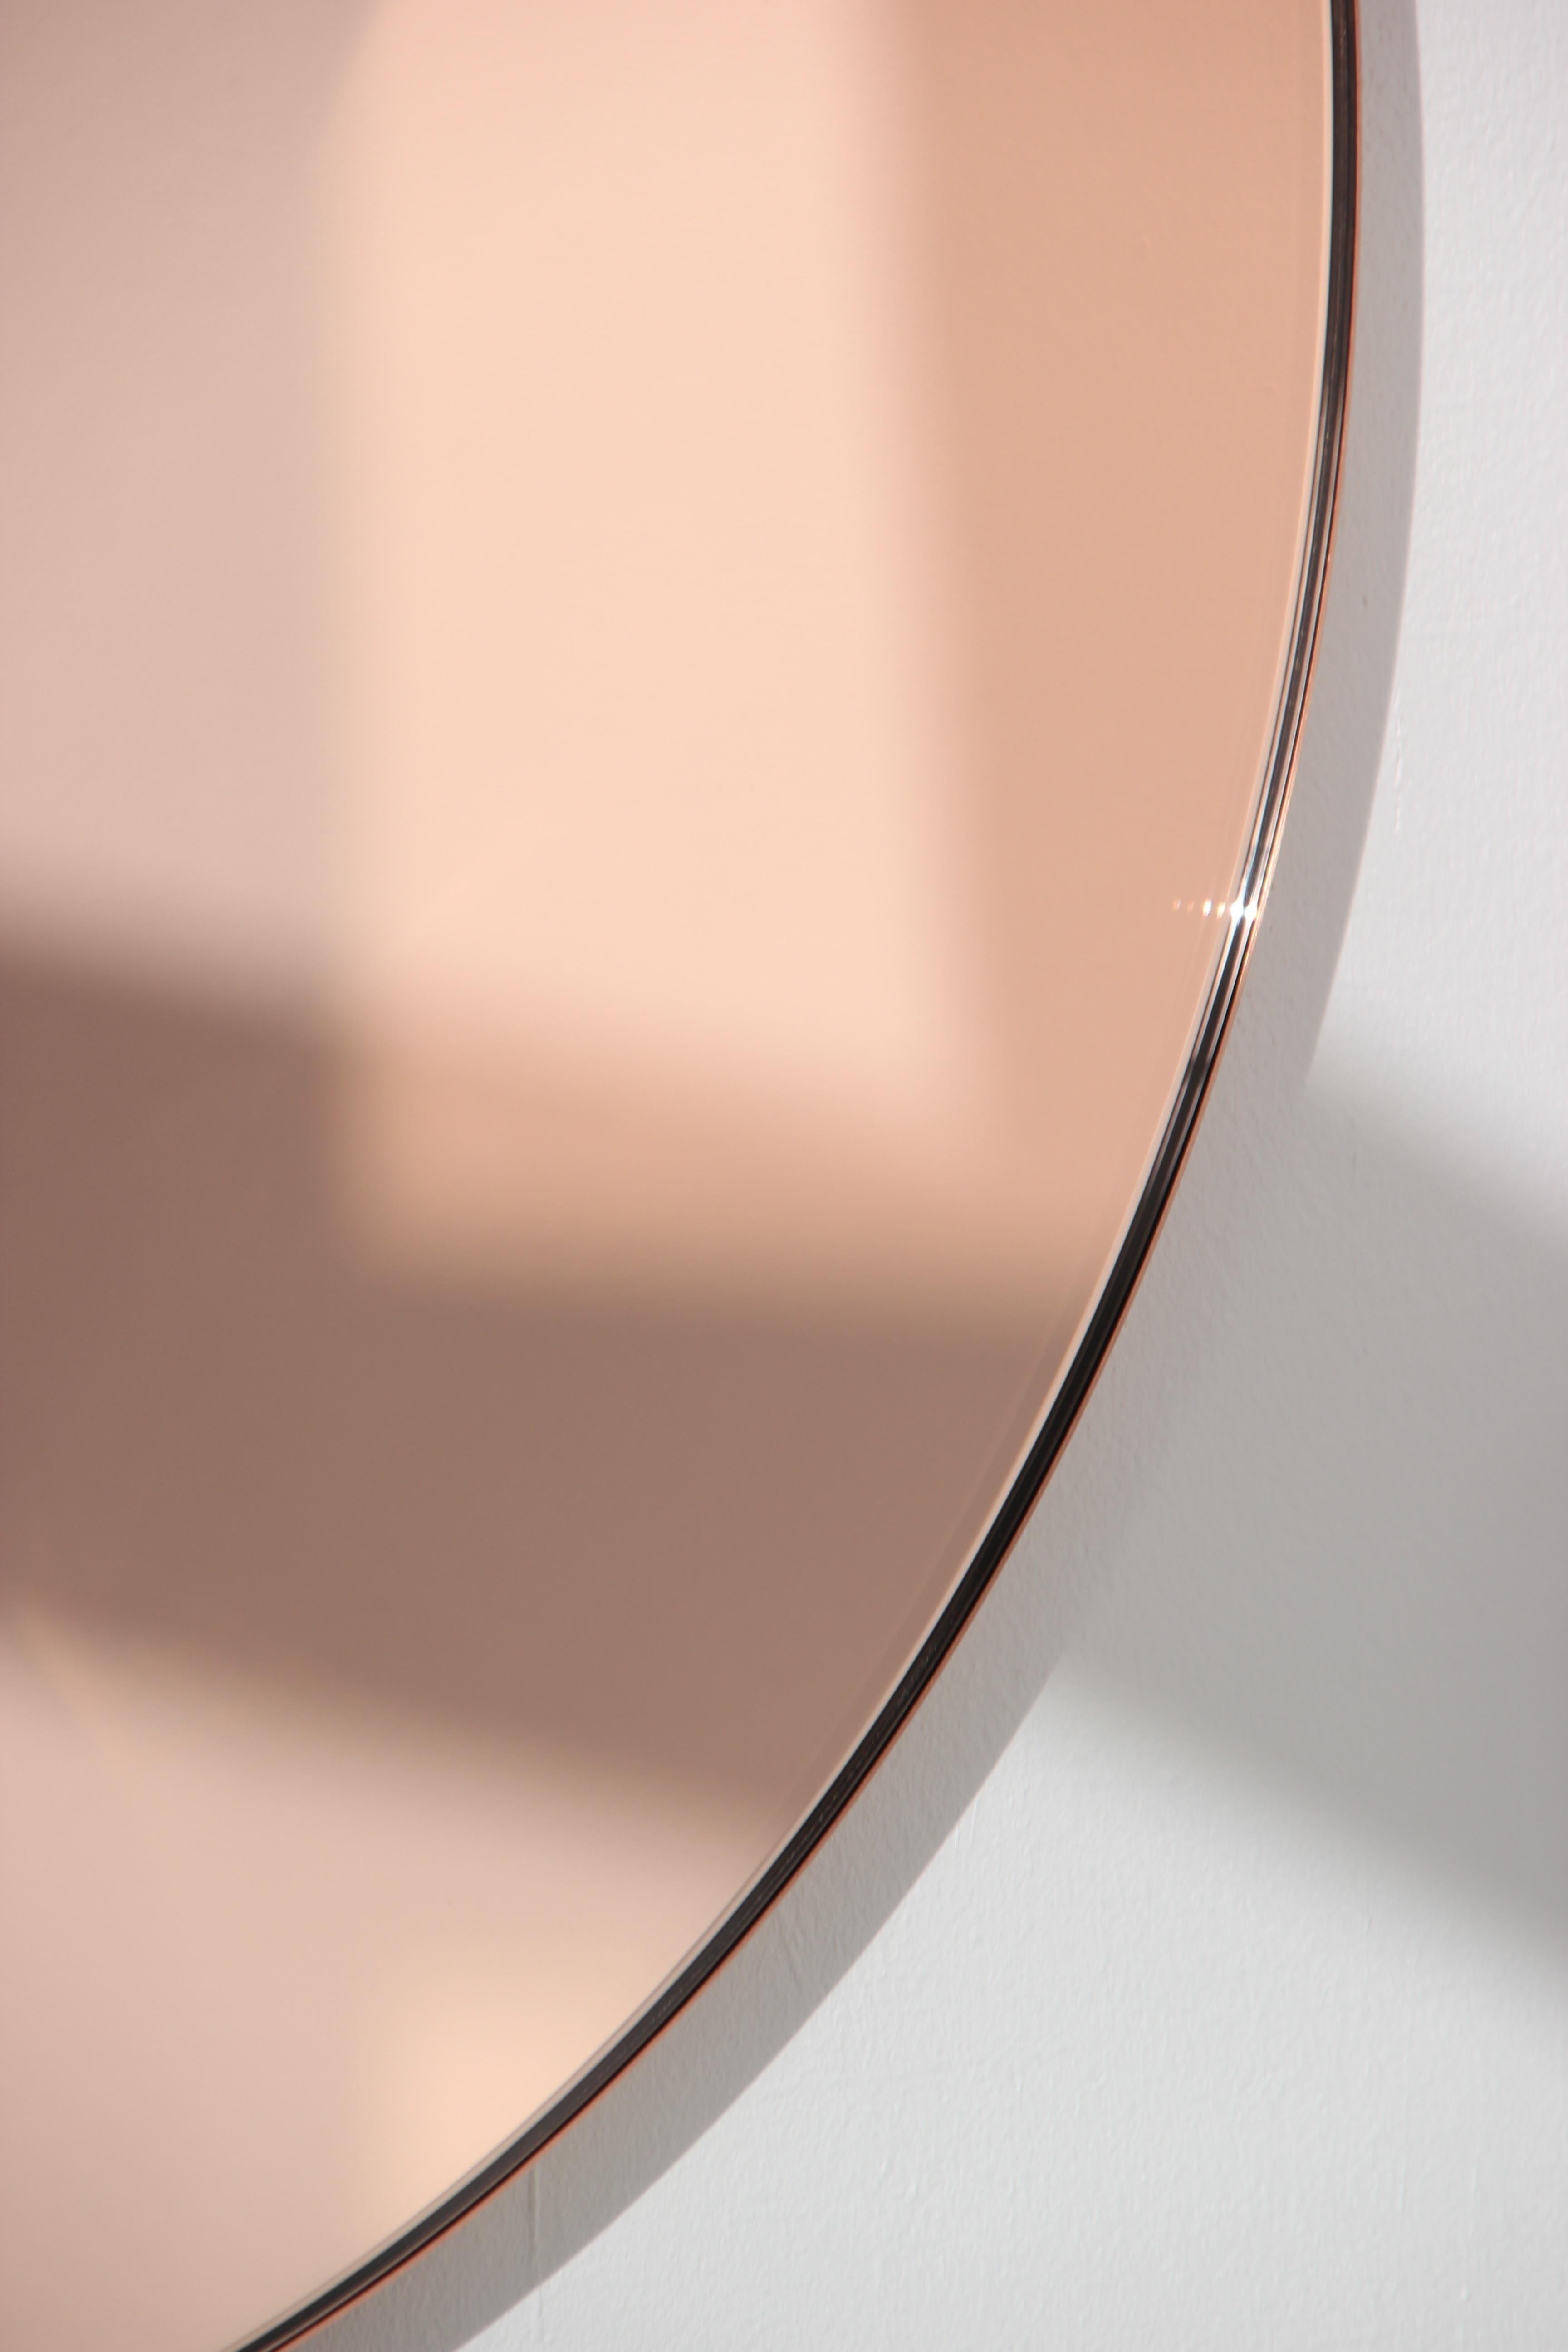 Brushed Orbis Rose Gold Tinted Contemporary Round Mirror with Copper Frame, Medium For Sale